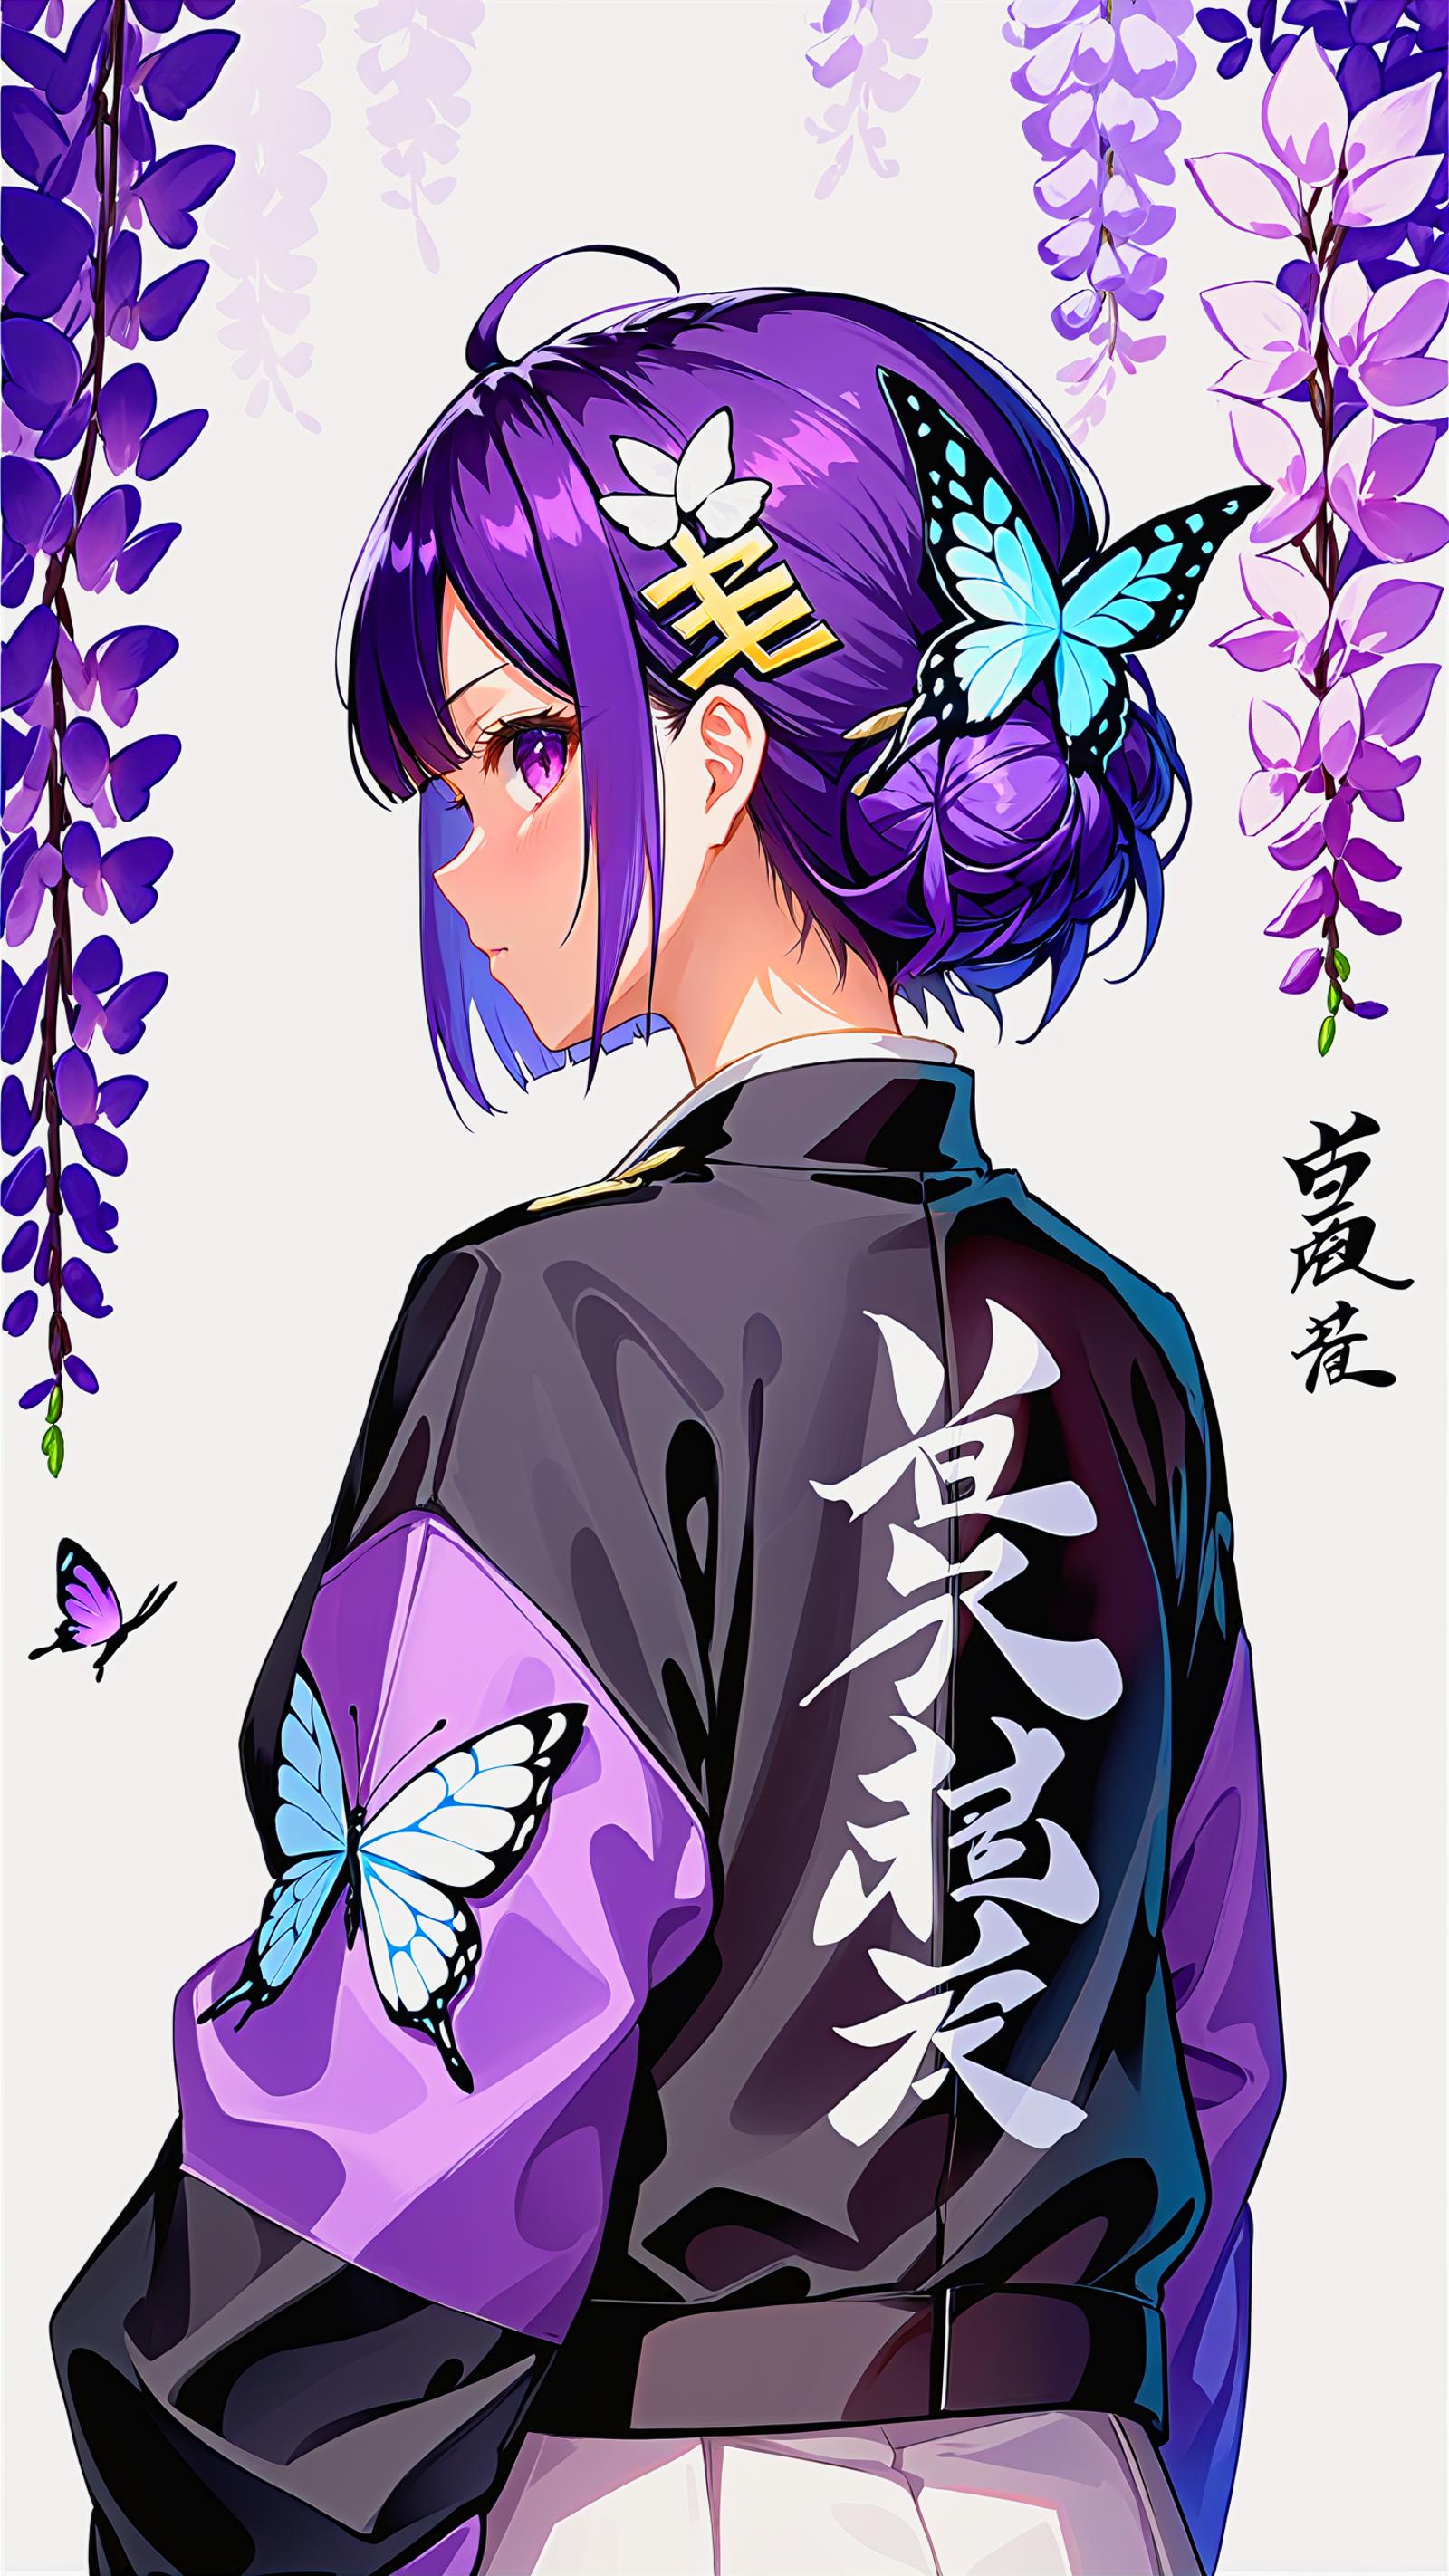 A young girl with purple hair and a butterfly design on her clothing.